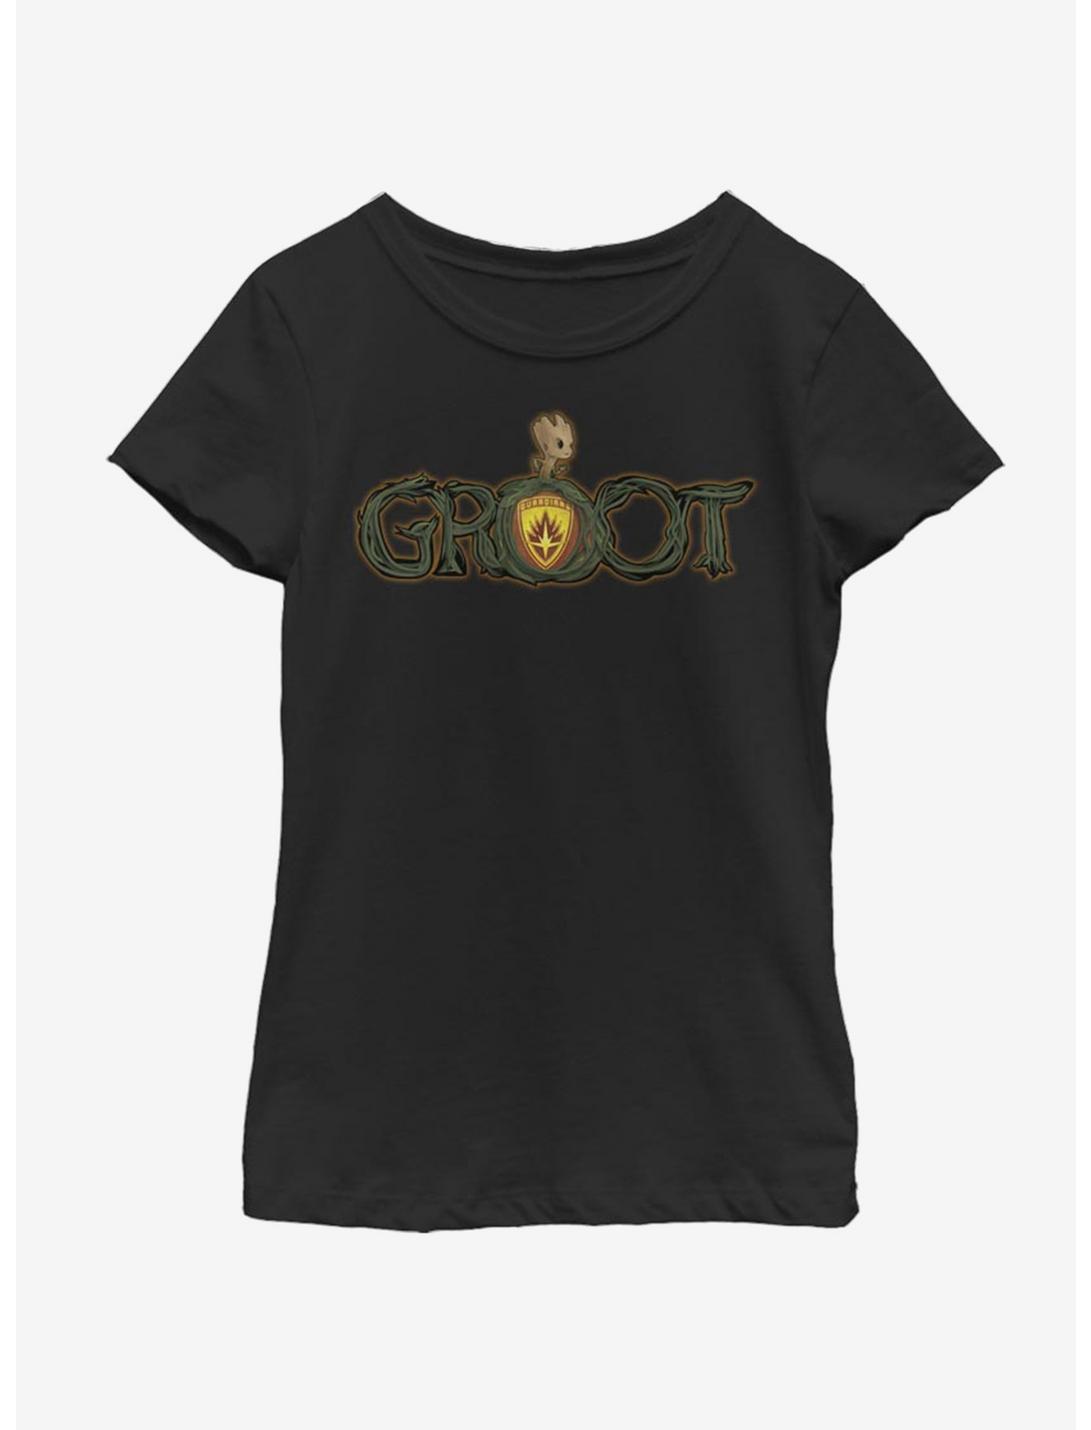 Marvel Guardians Of The Galaxy Groot Smoke Youth Girls T-Shirt, BLACK, hi-res